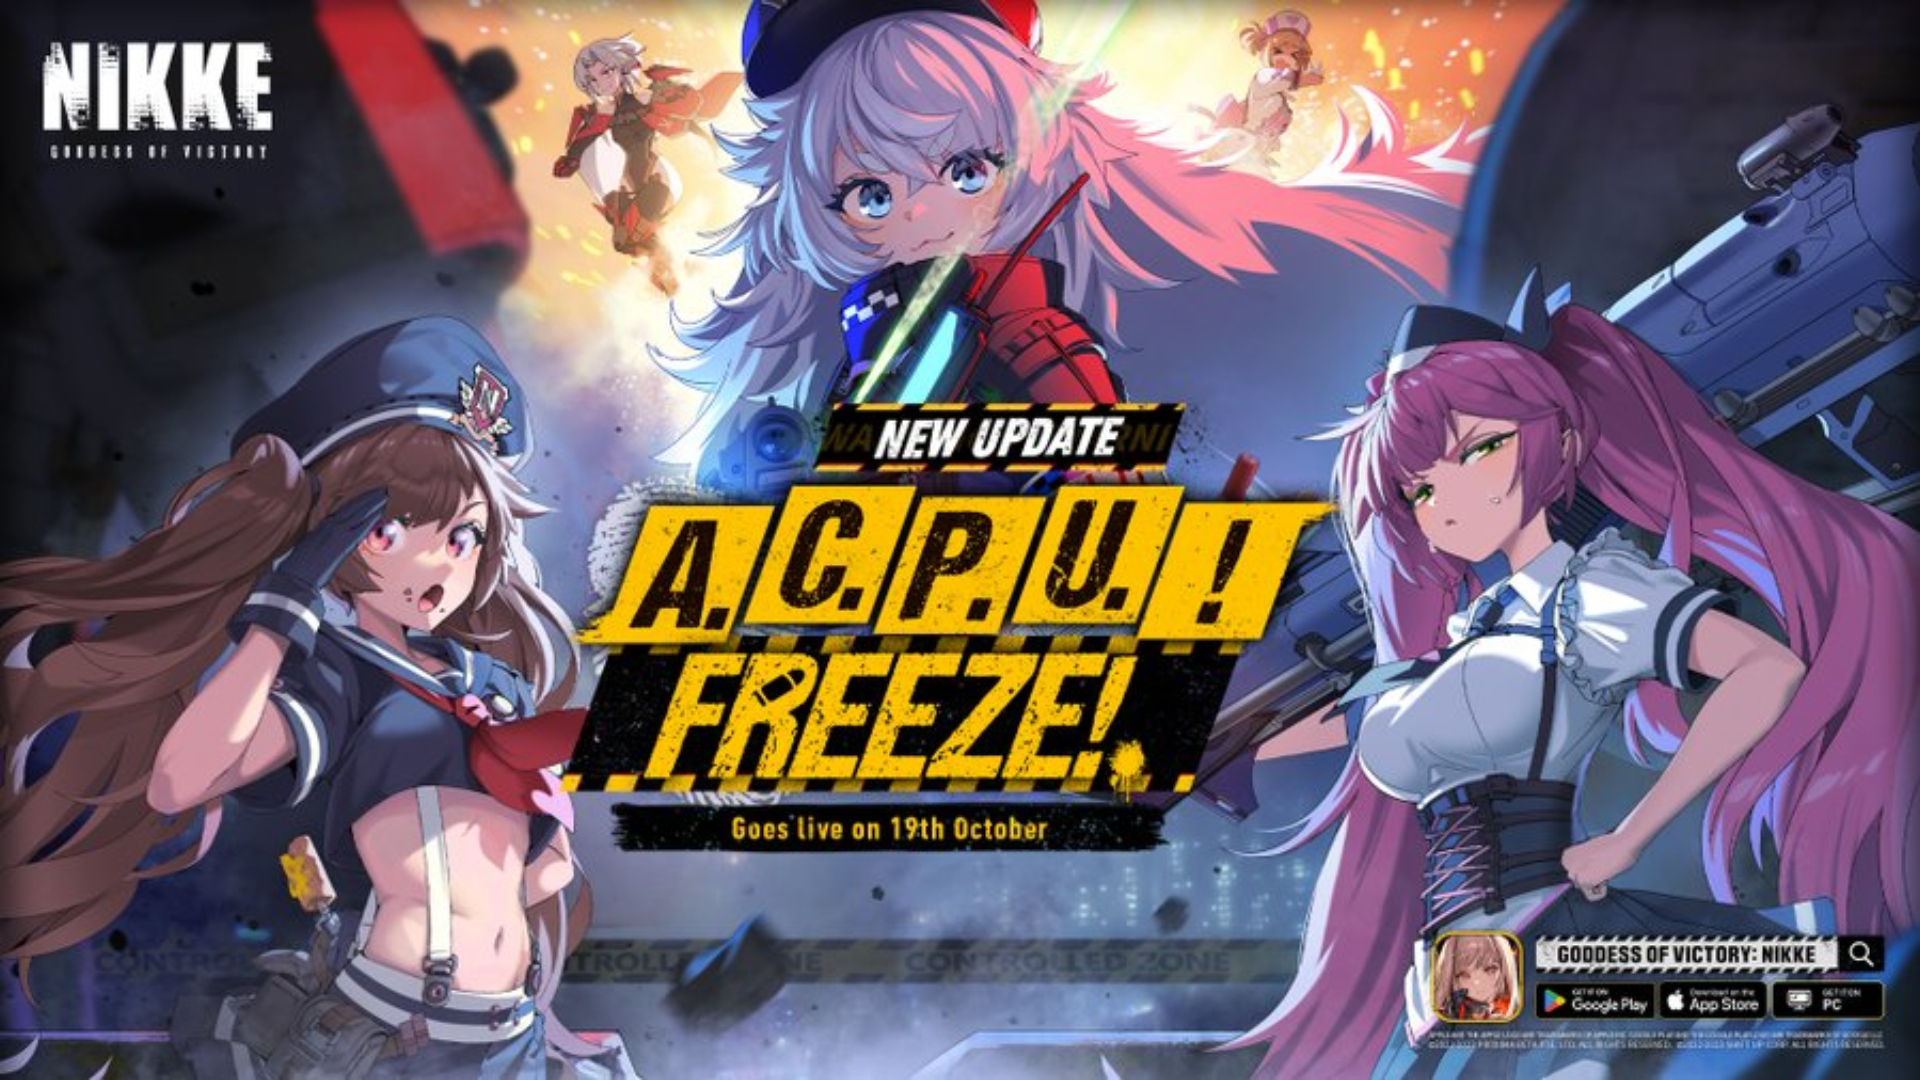 Goddess of Victory: NIKKE Unveils ‘A.C.P.U.! FREEZE!’ Event with New Character image